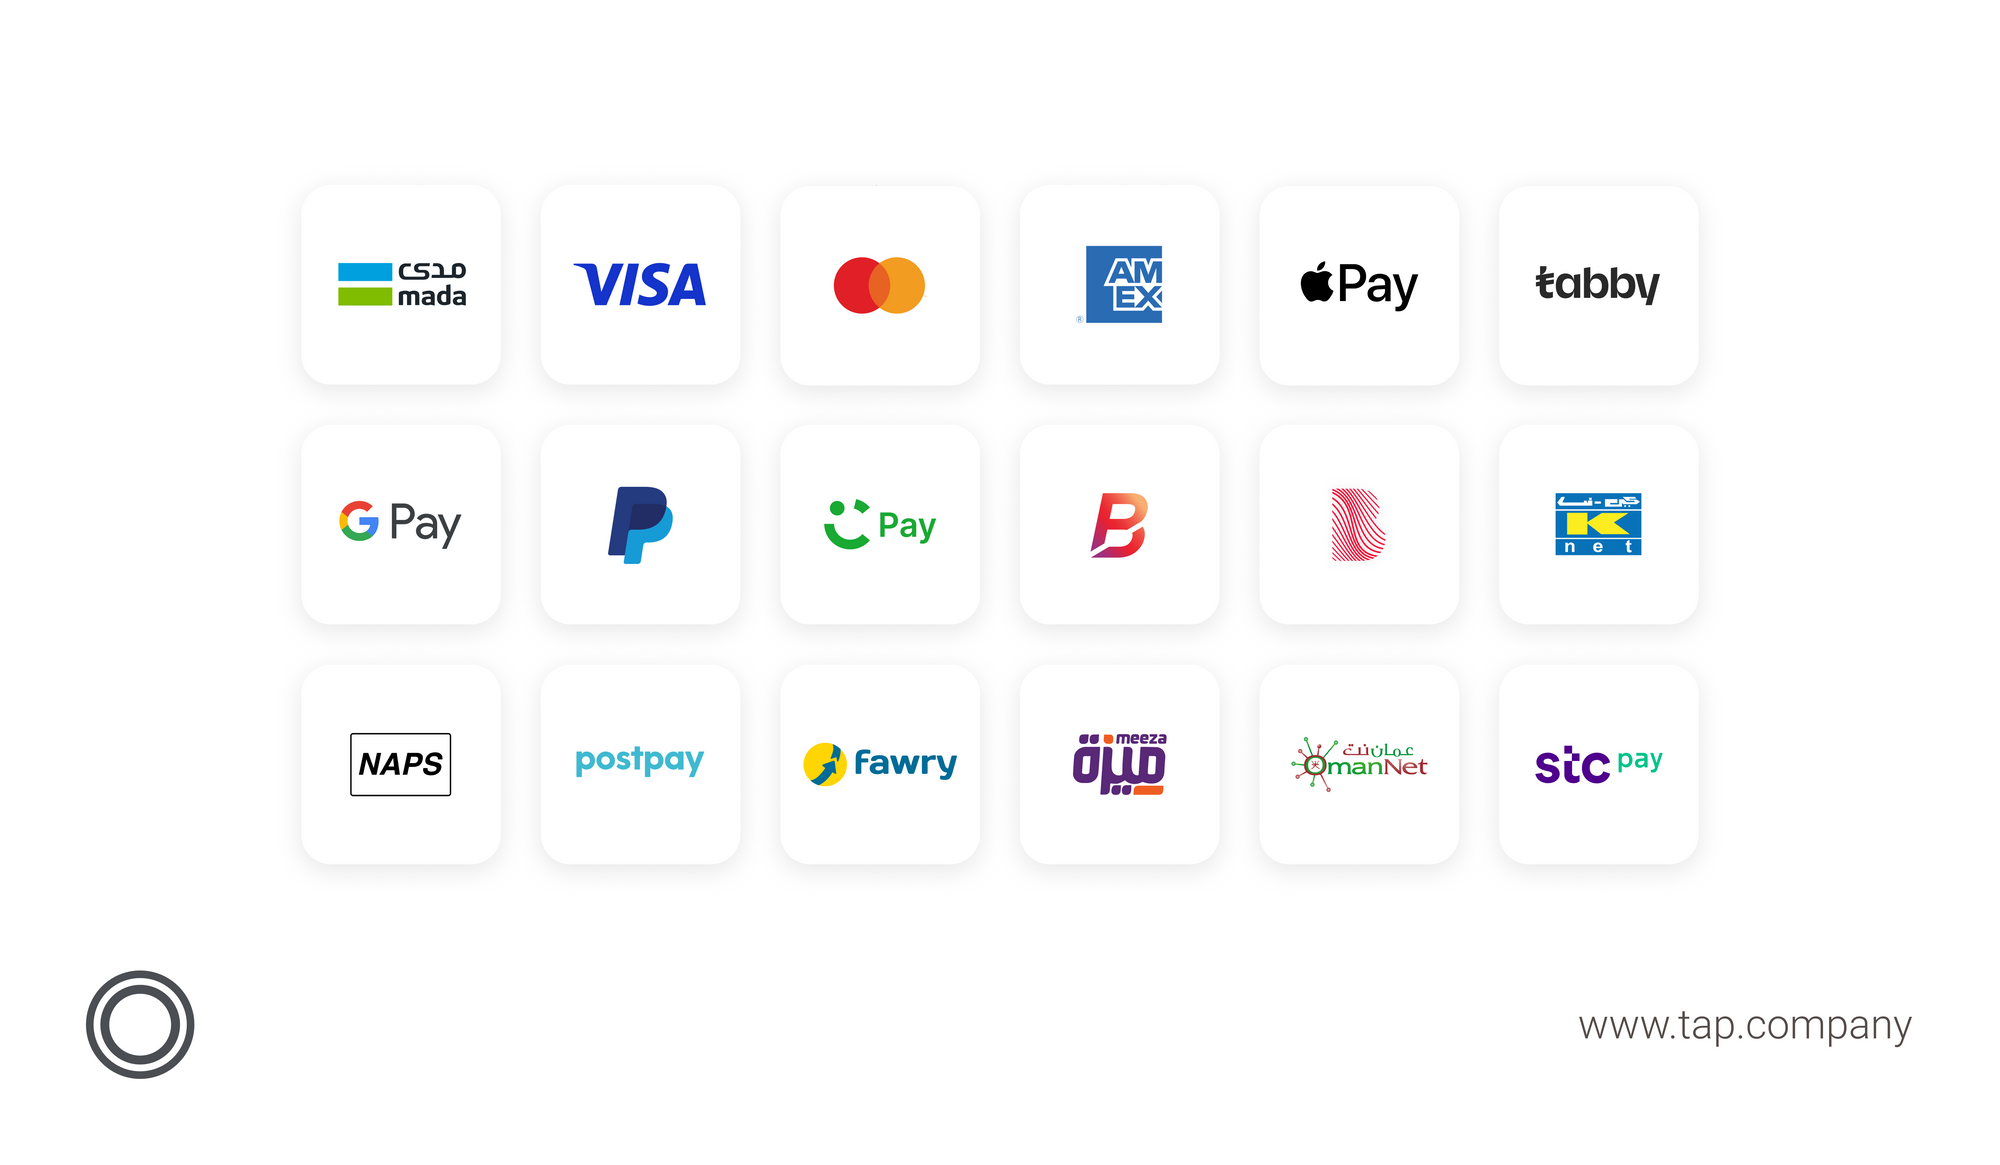 Some of the most popular payment methods across MENA